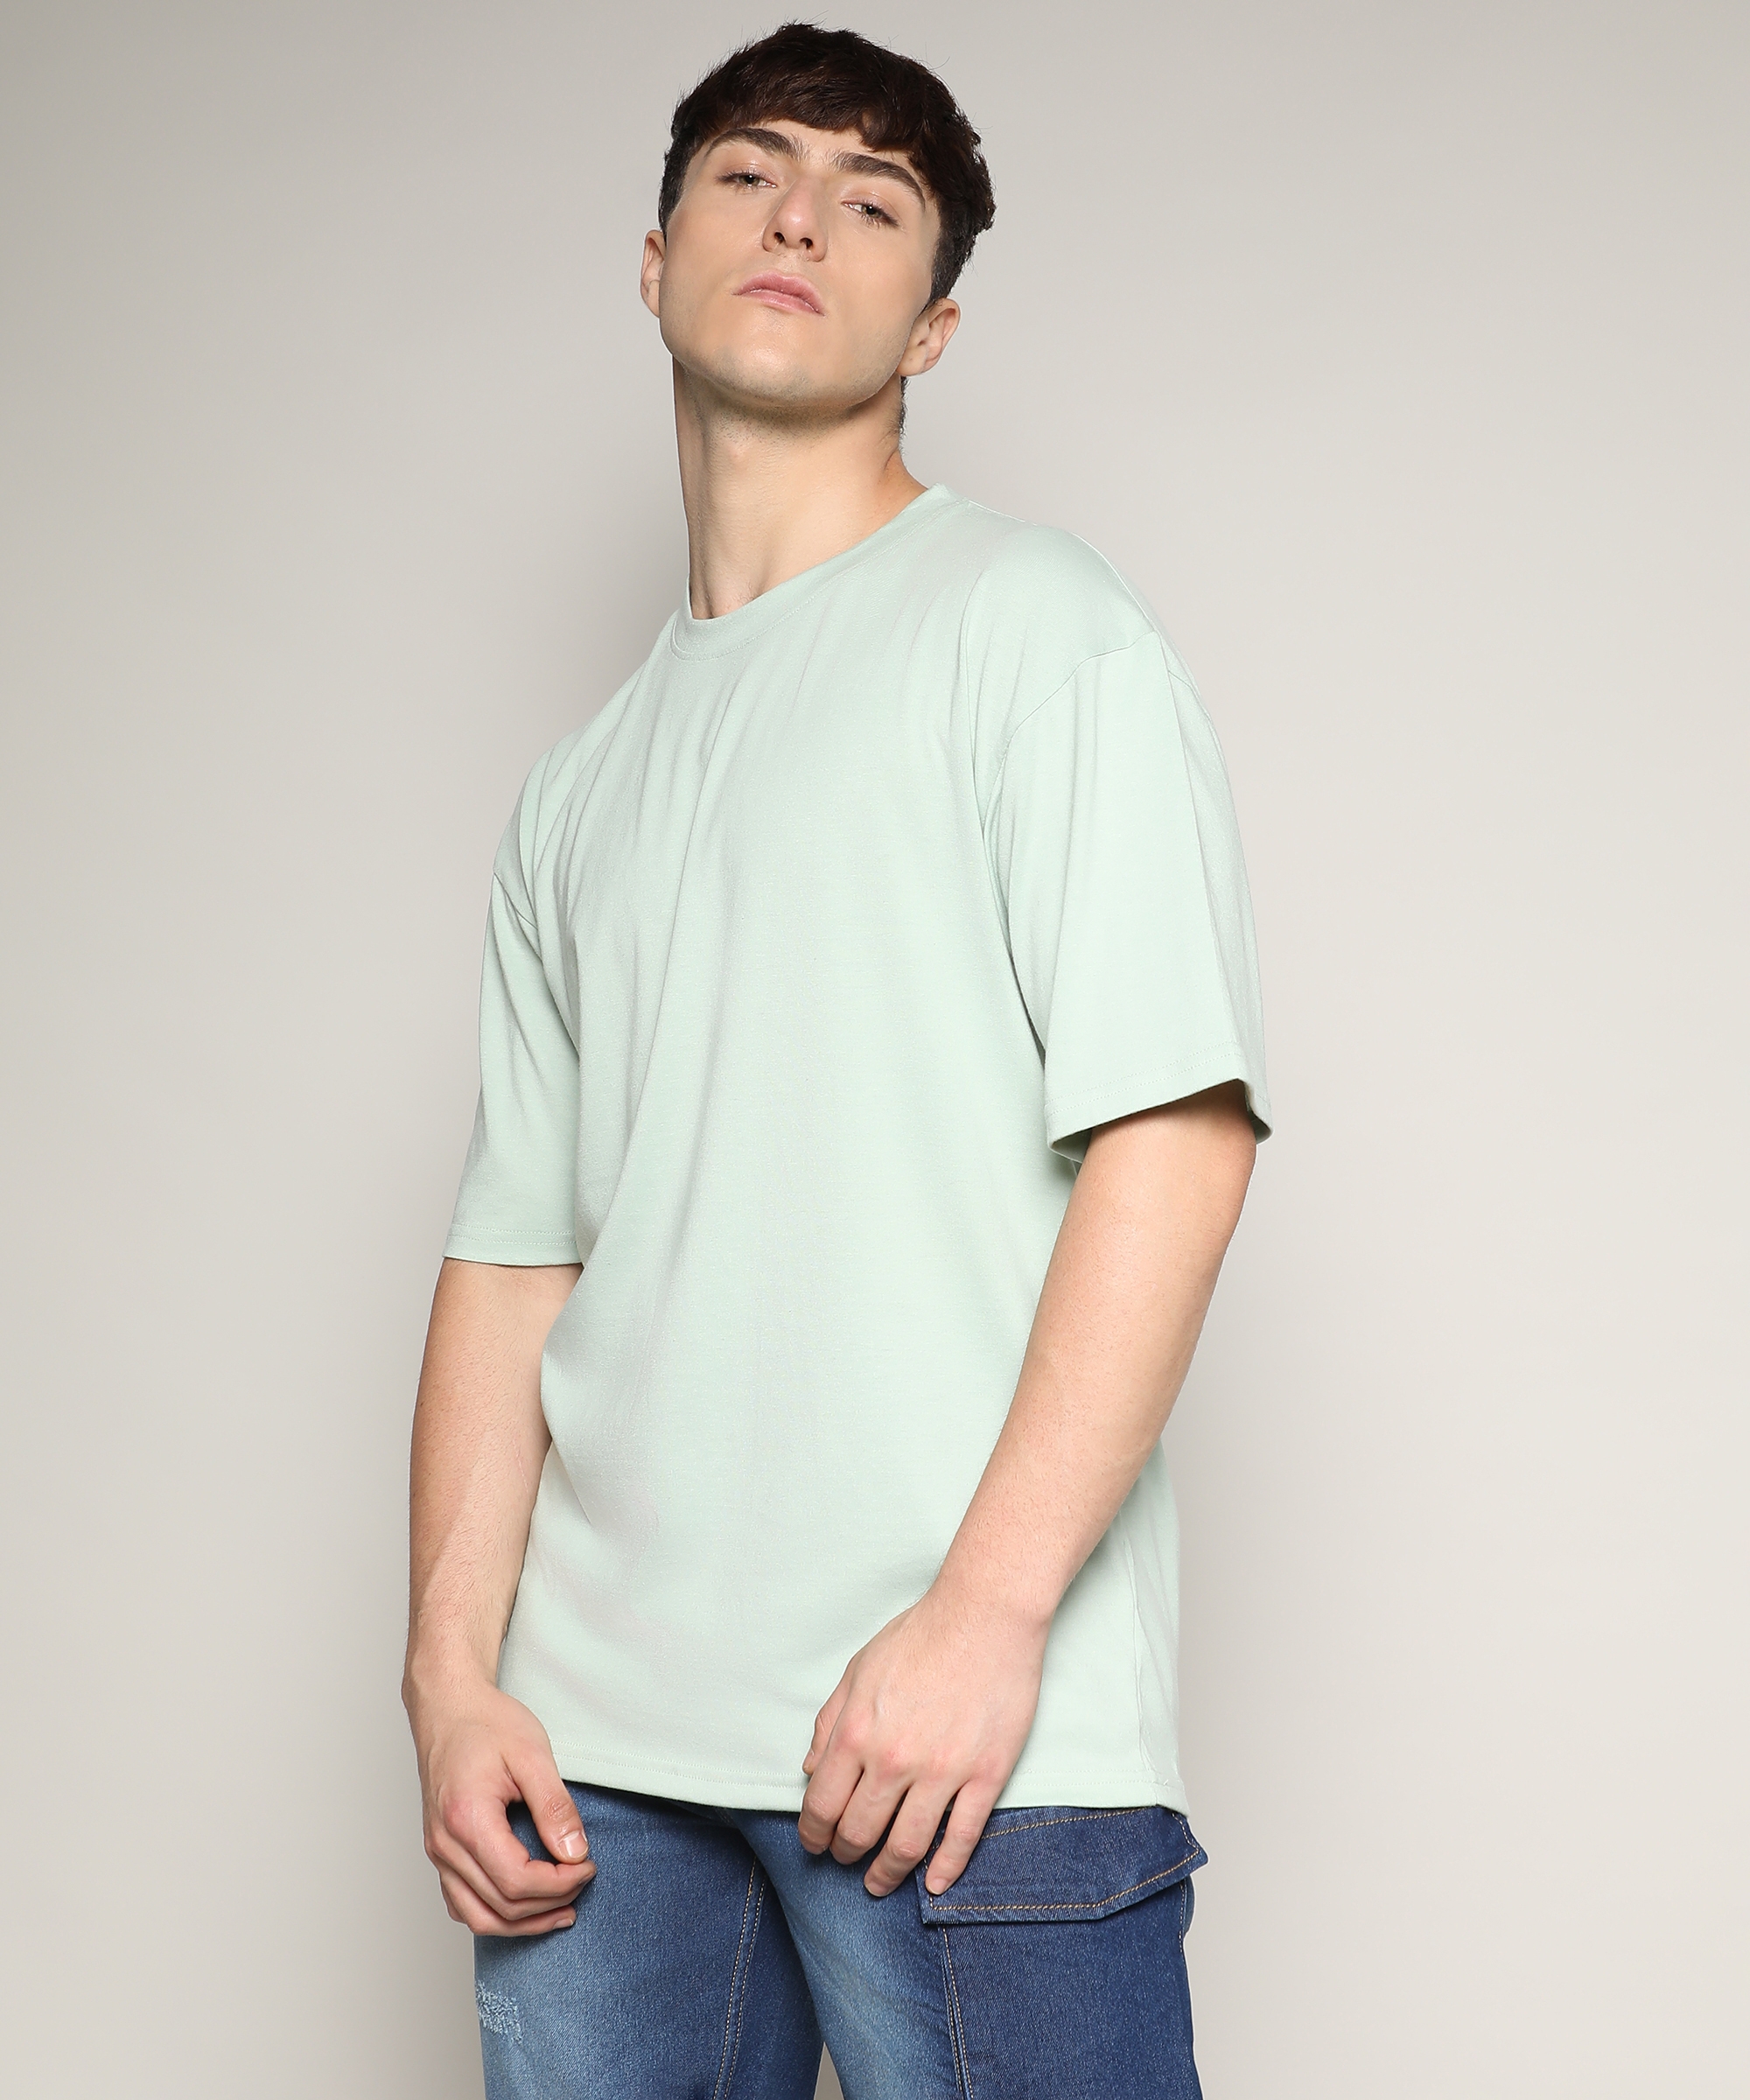 CAMPUS SUTRA | Men's Tea Green Solid Oversized T-Shirt